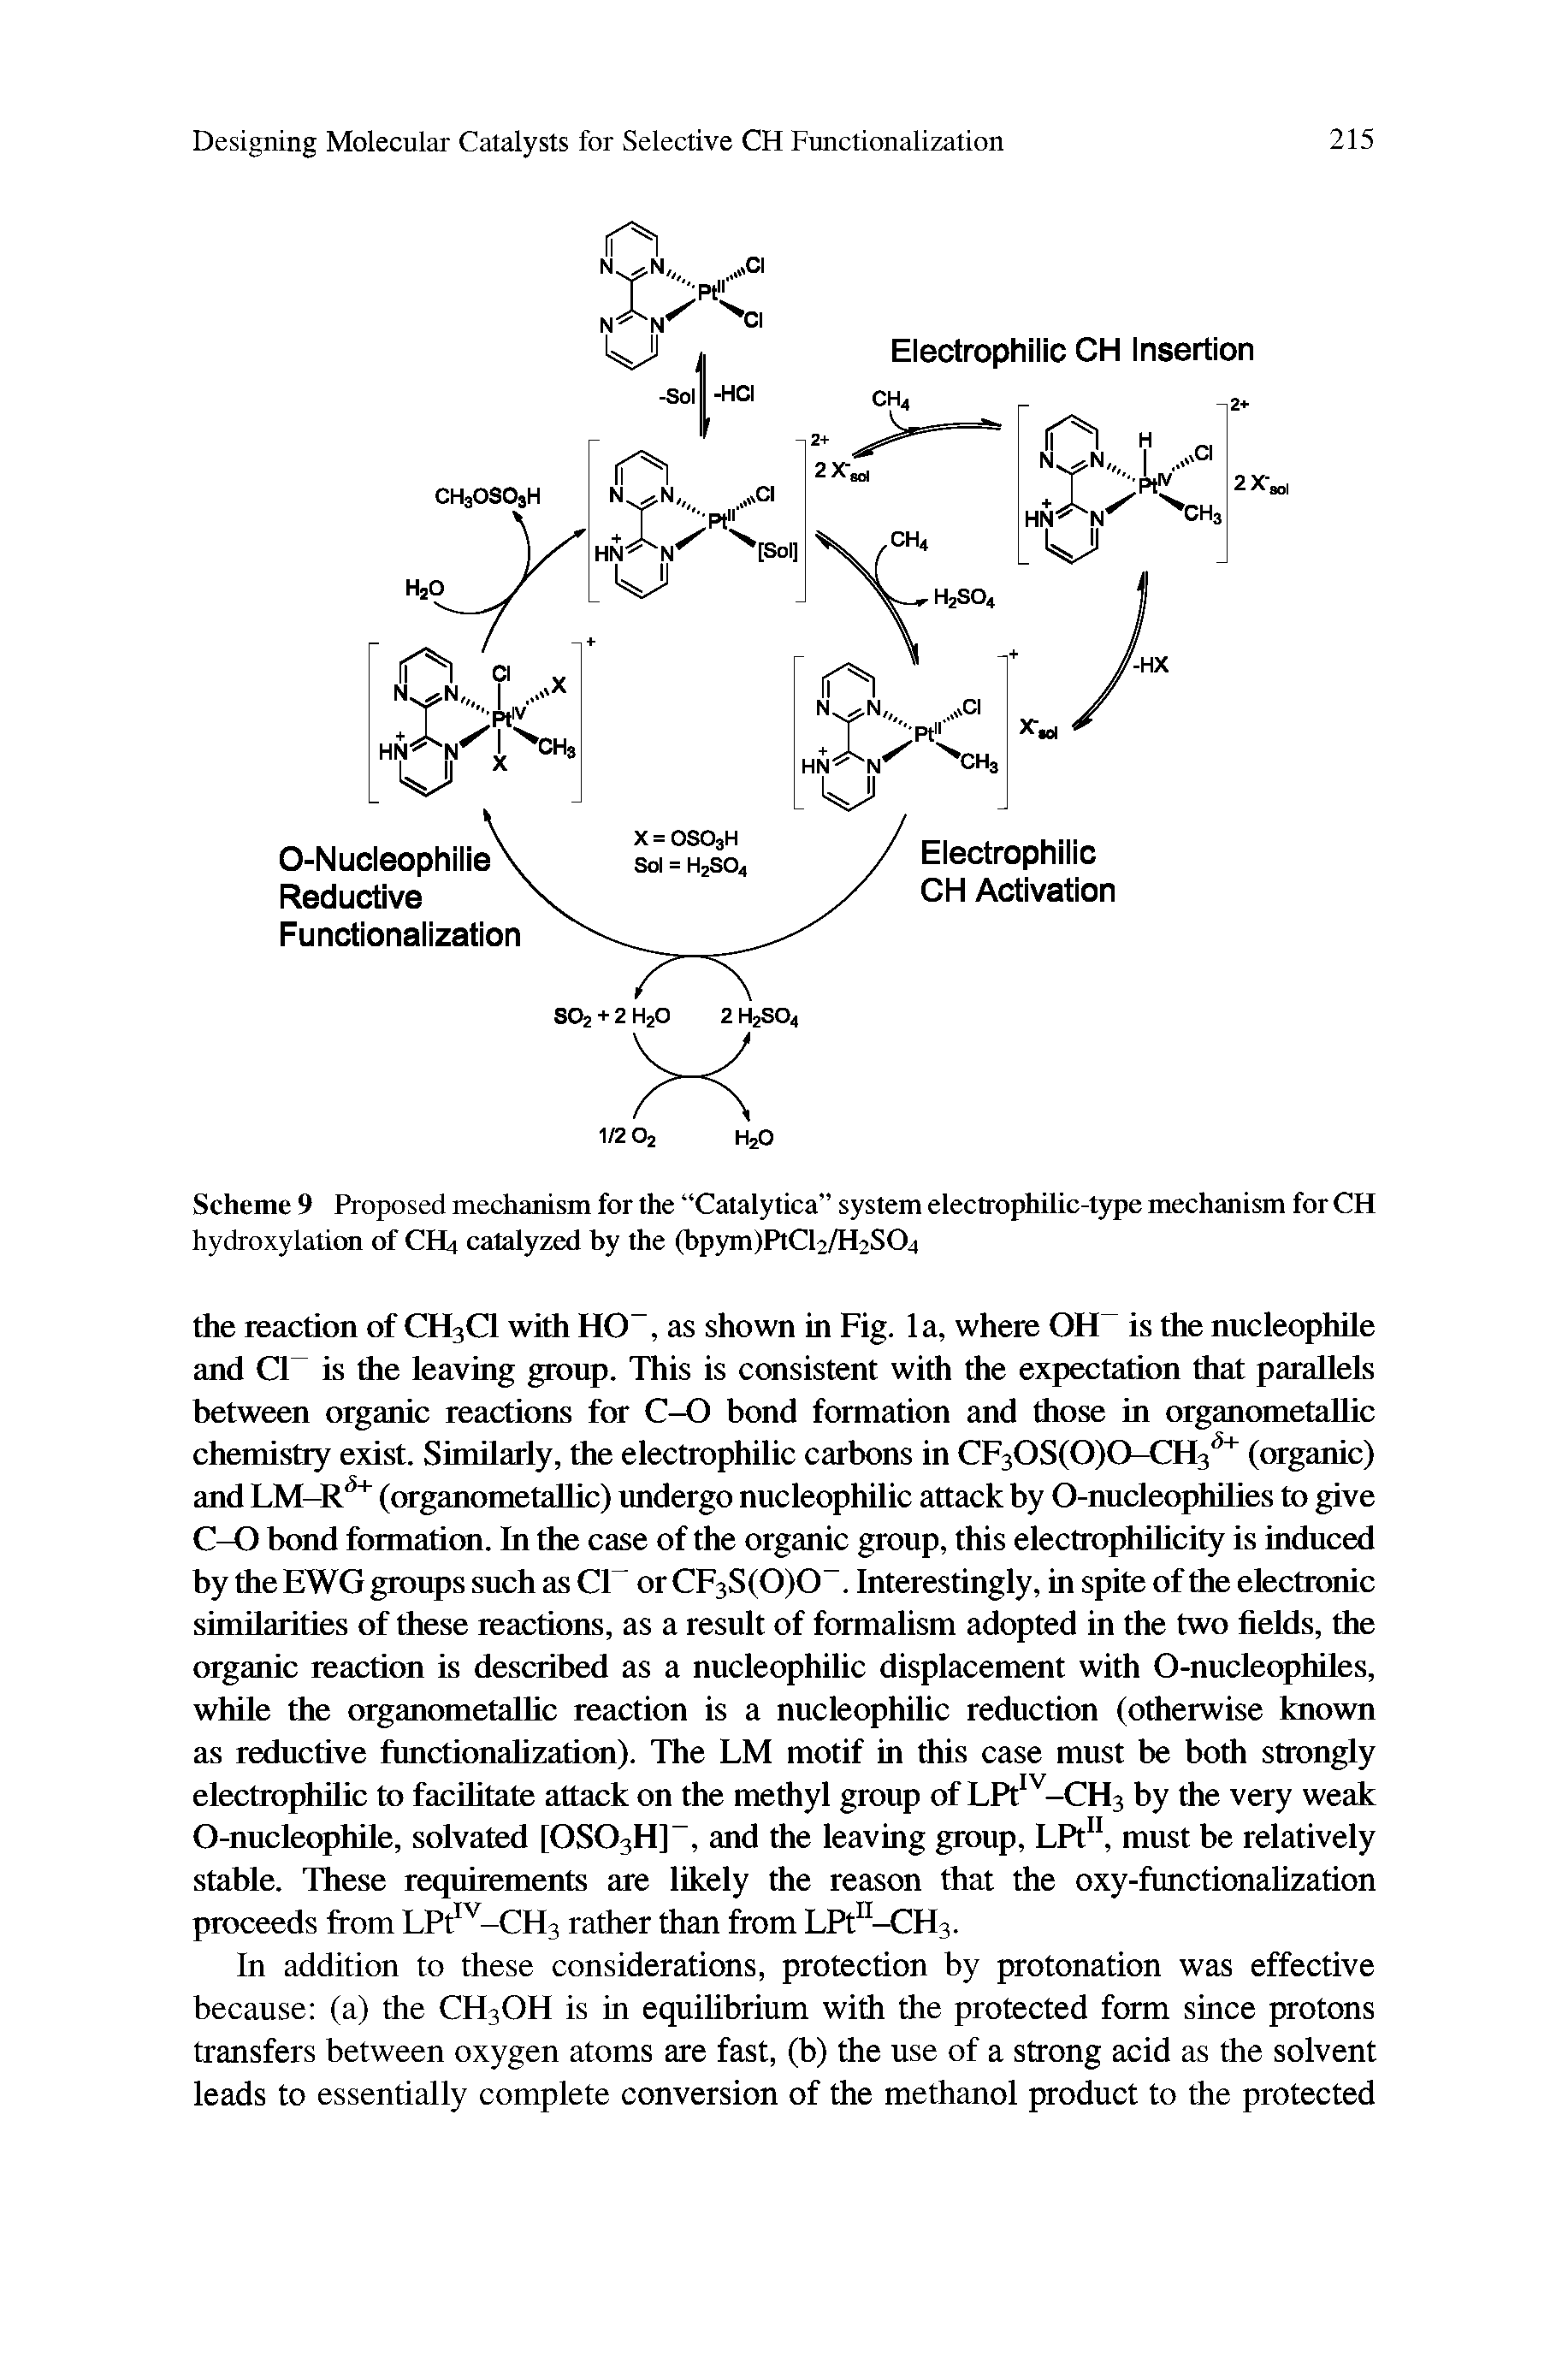 Scheme 9 Proposed mechanism for the Catalytica system electrophilic-type mechanism for CH hydroxylation of CH4 catalyzed by the (bpym)PtCl2/H2S04...